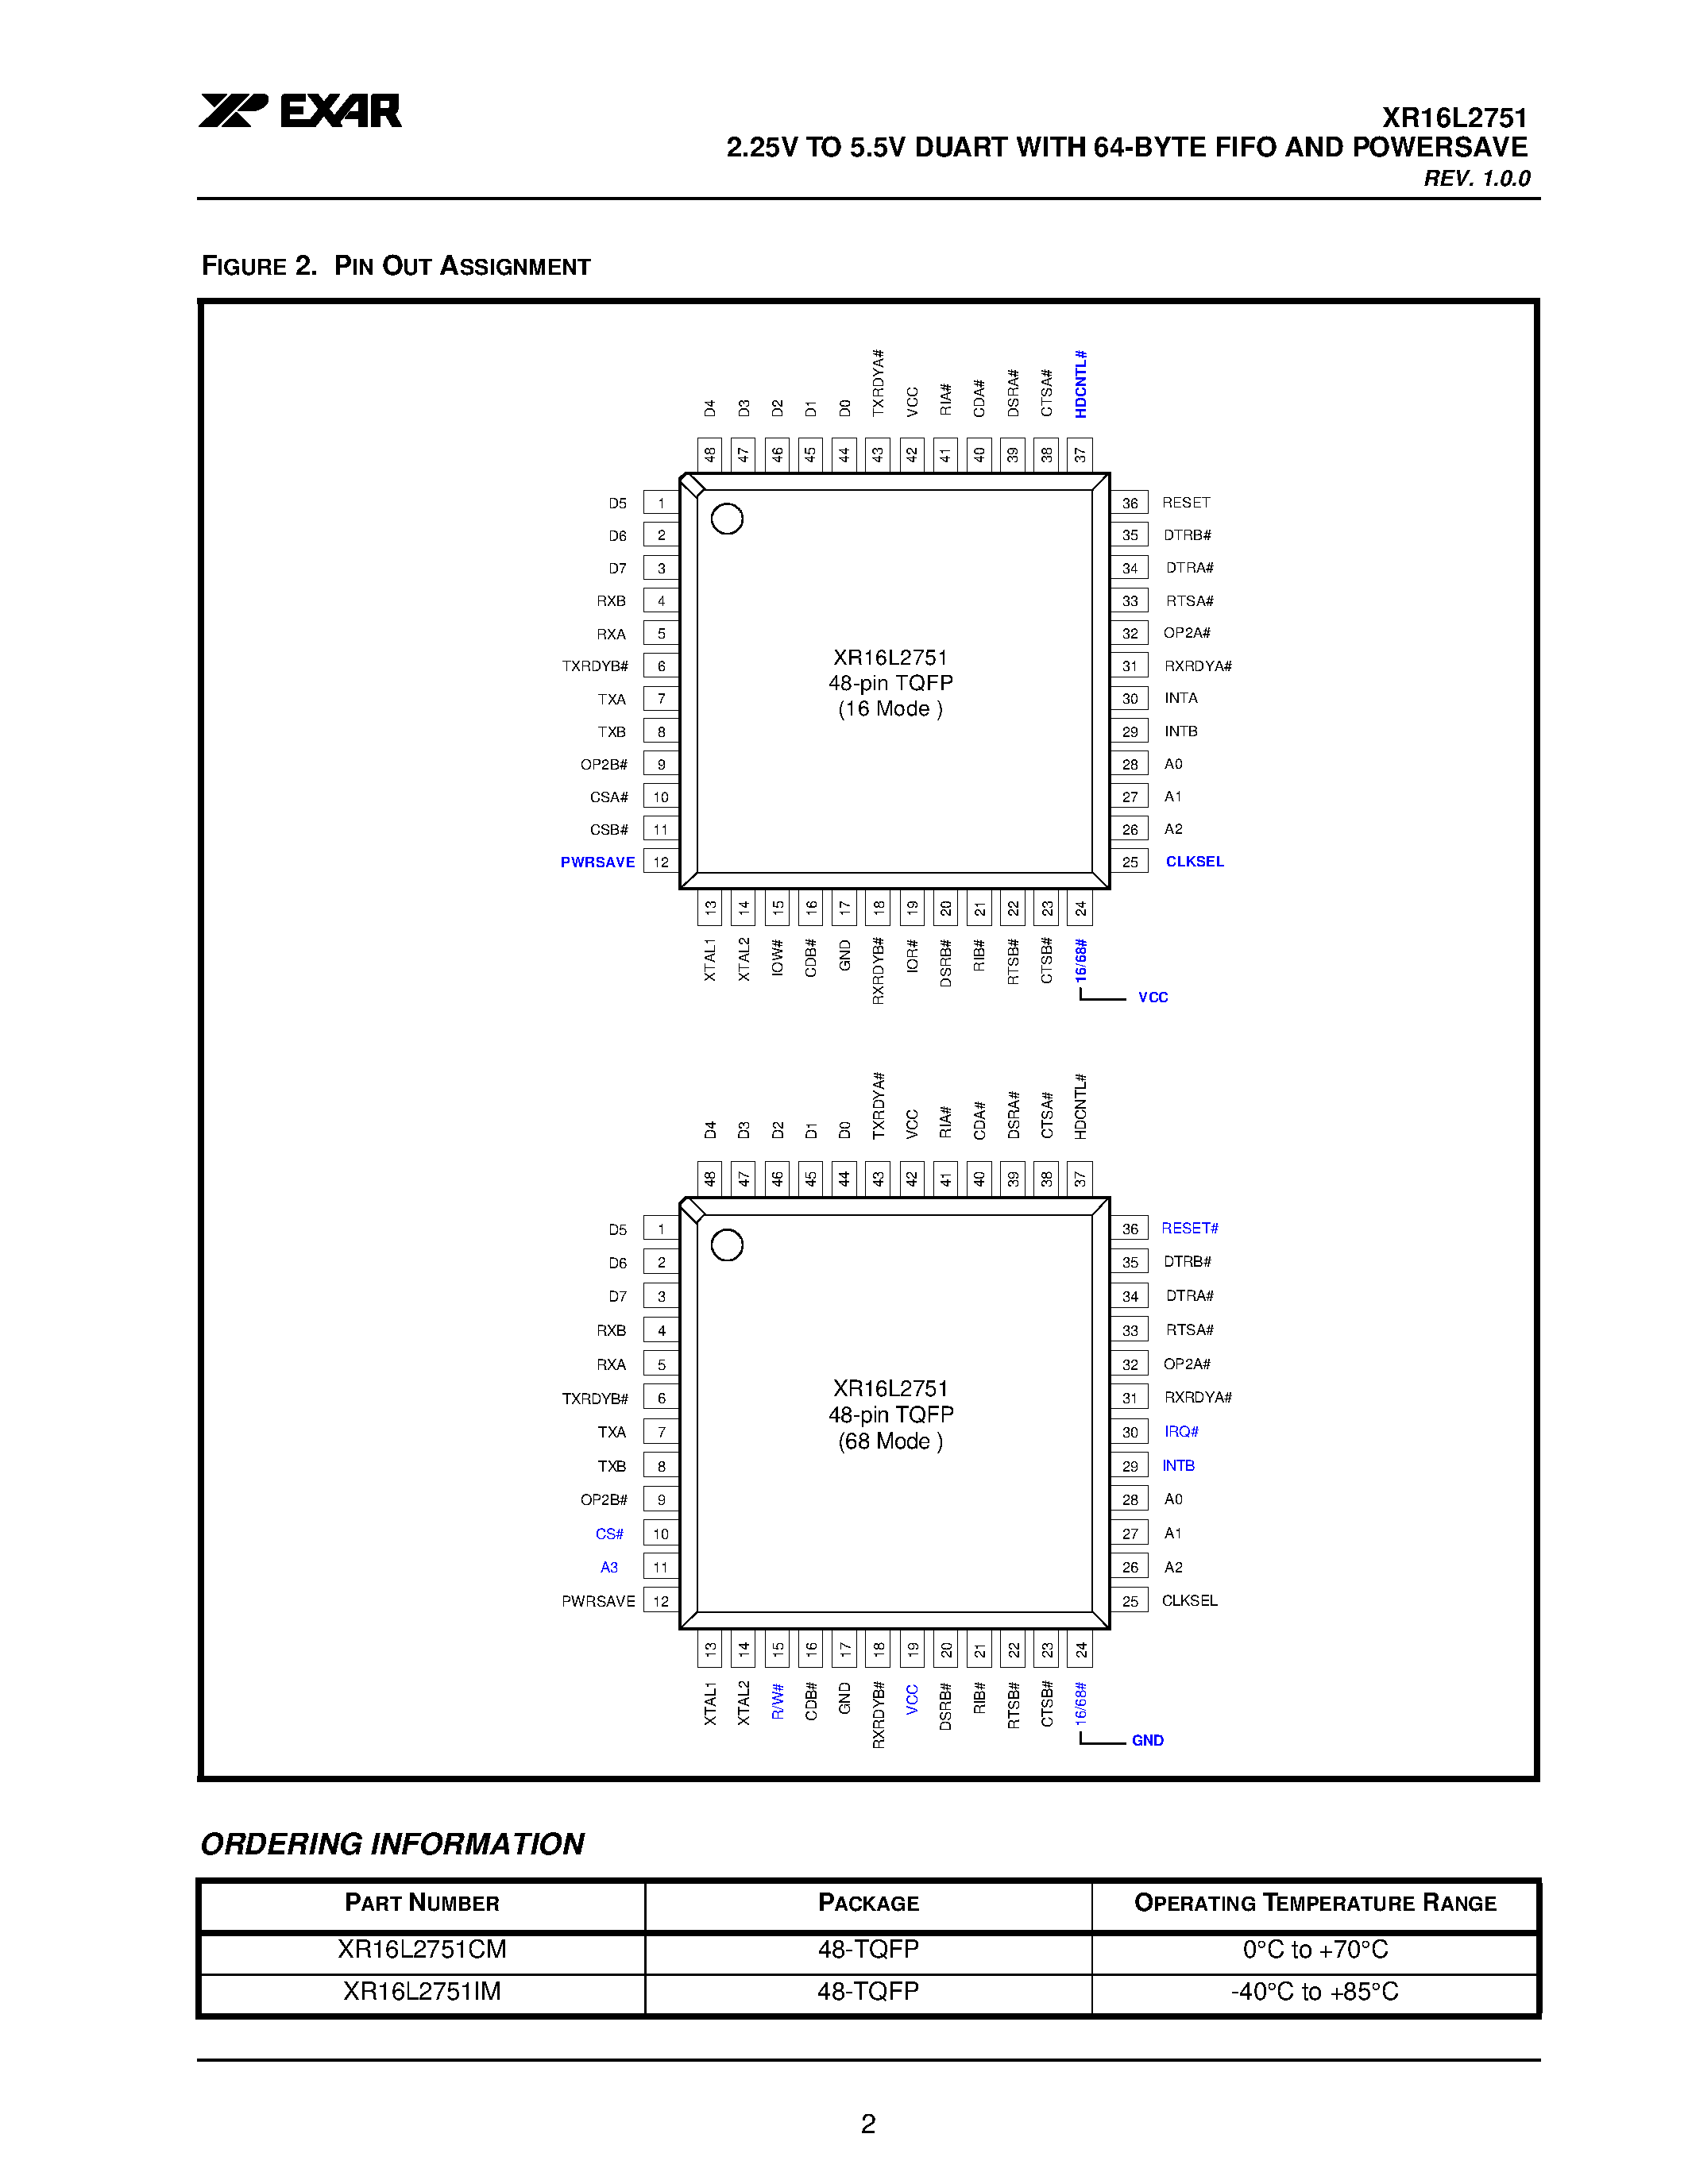 Datasheet XR16L2751 - 2.25V TO 5.5V DUART WITH 64-BYTE FIFO AND POWERSAVE page 2